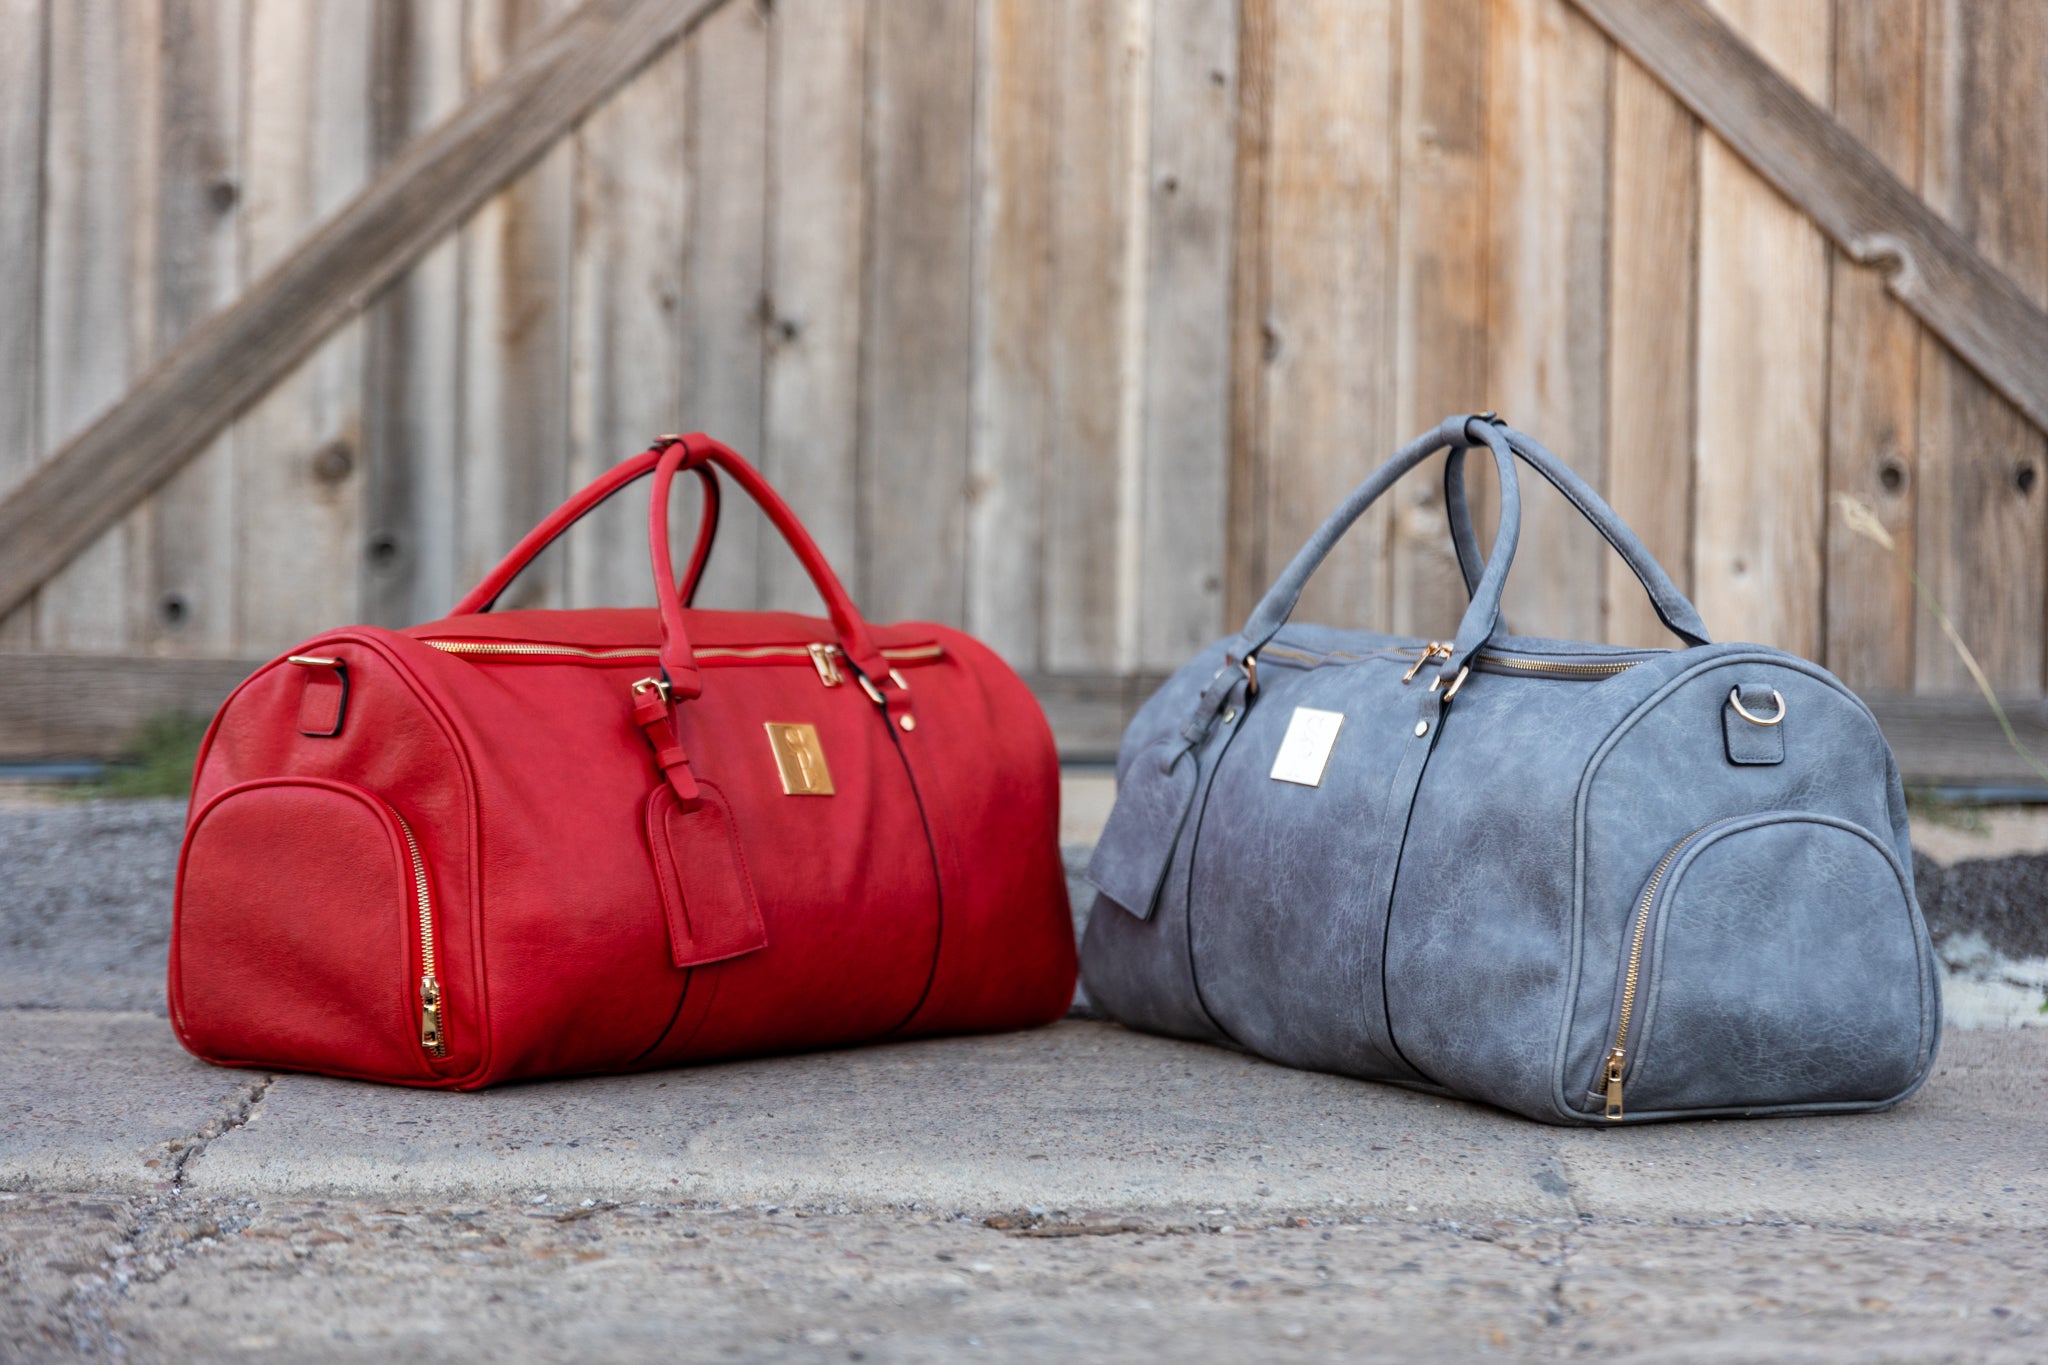 Buyers Guide: Carry-On Bags, Travel Luggage, and More